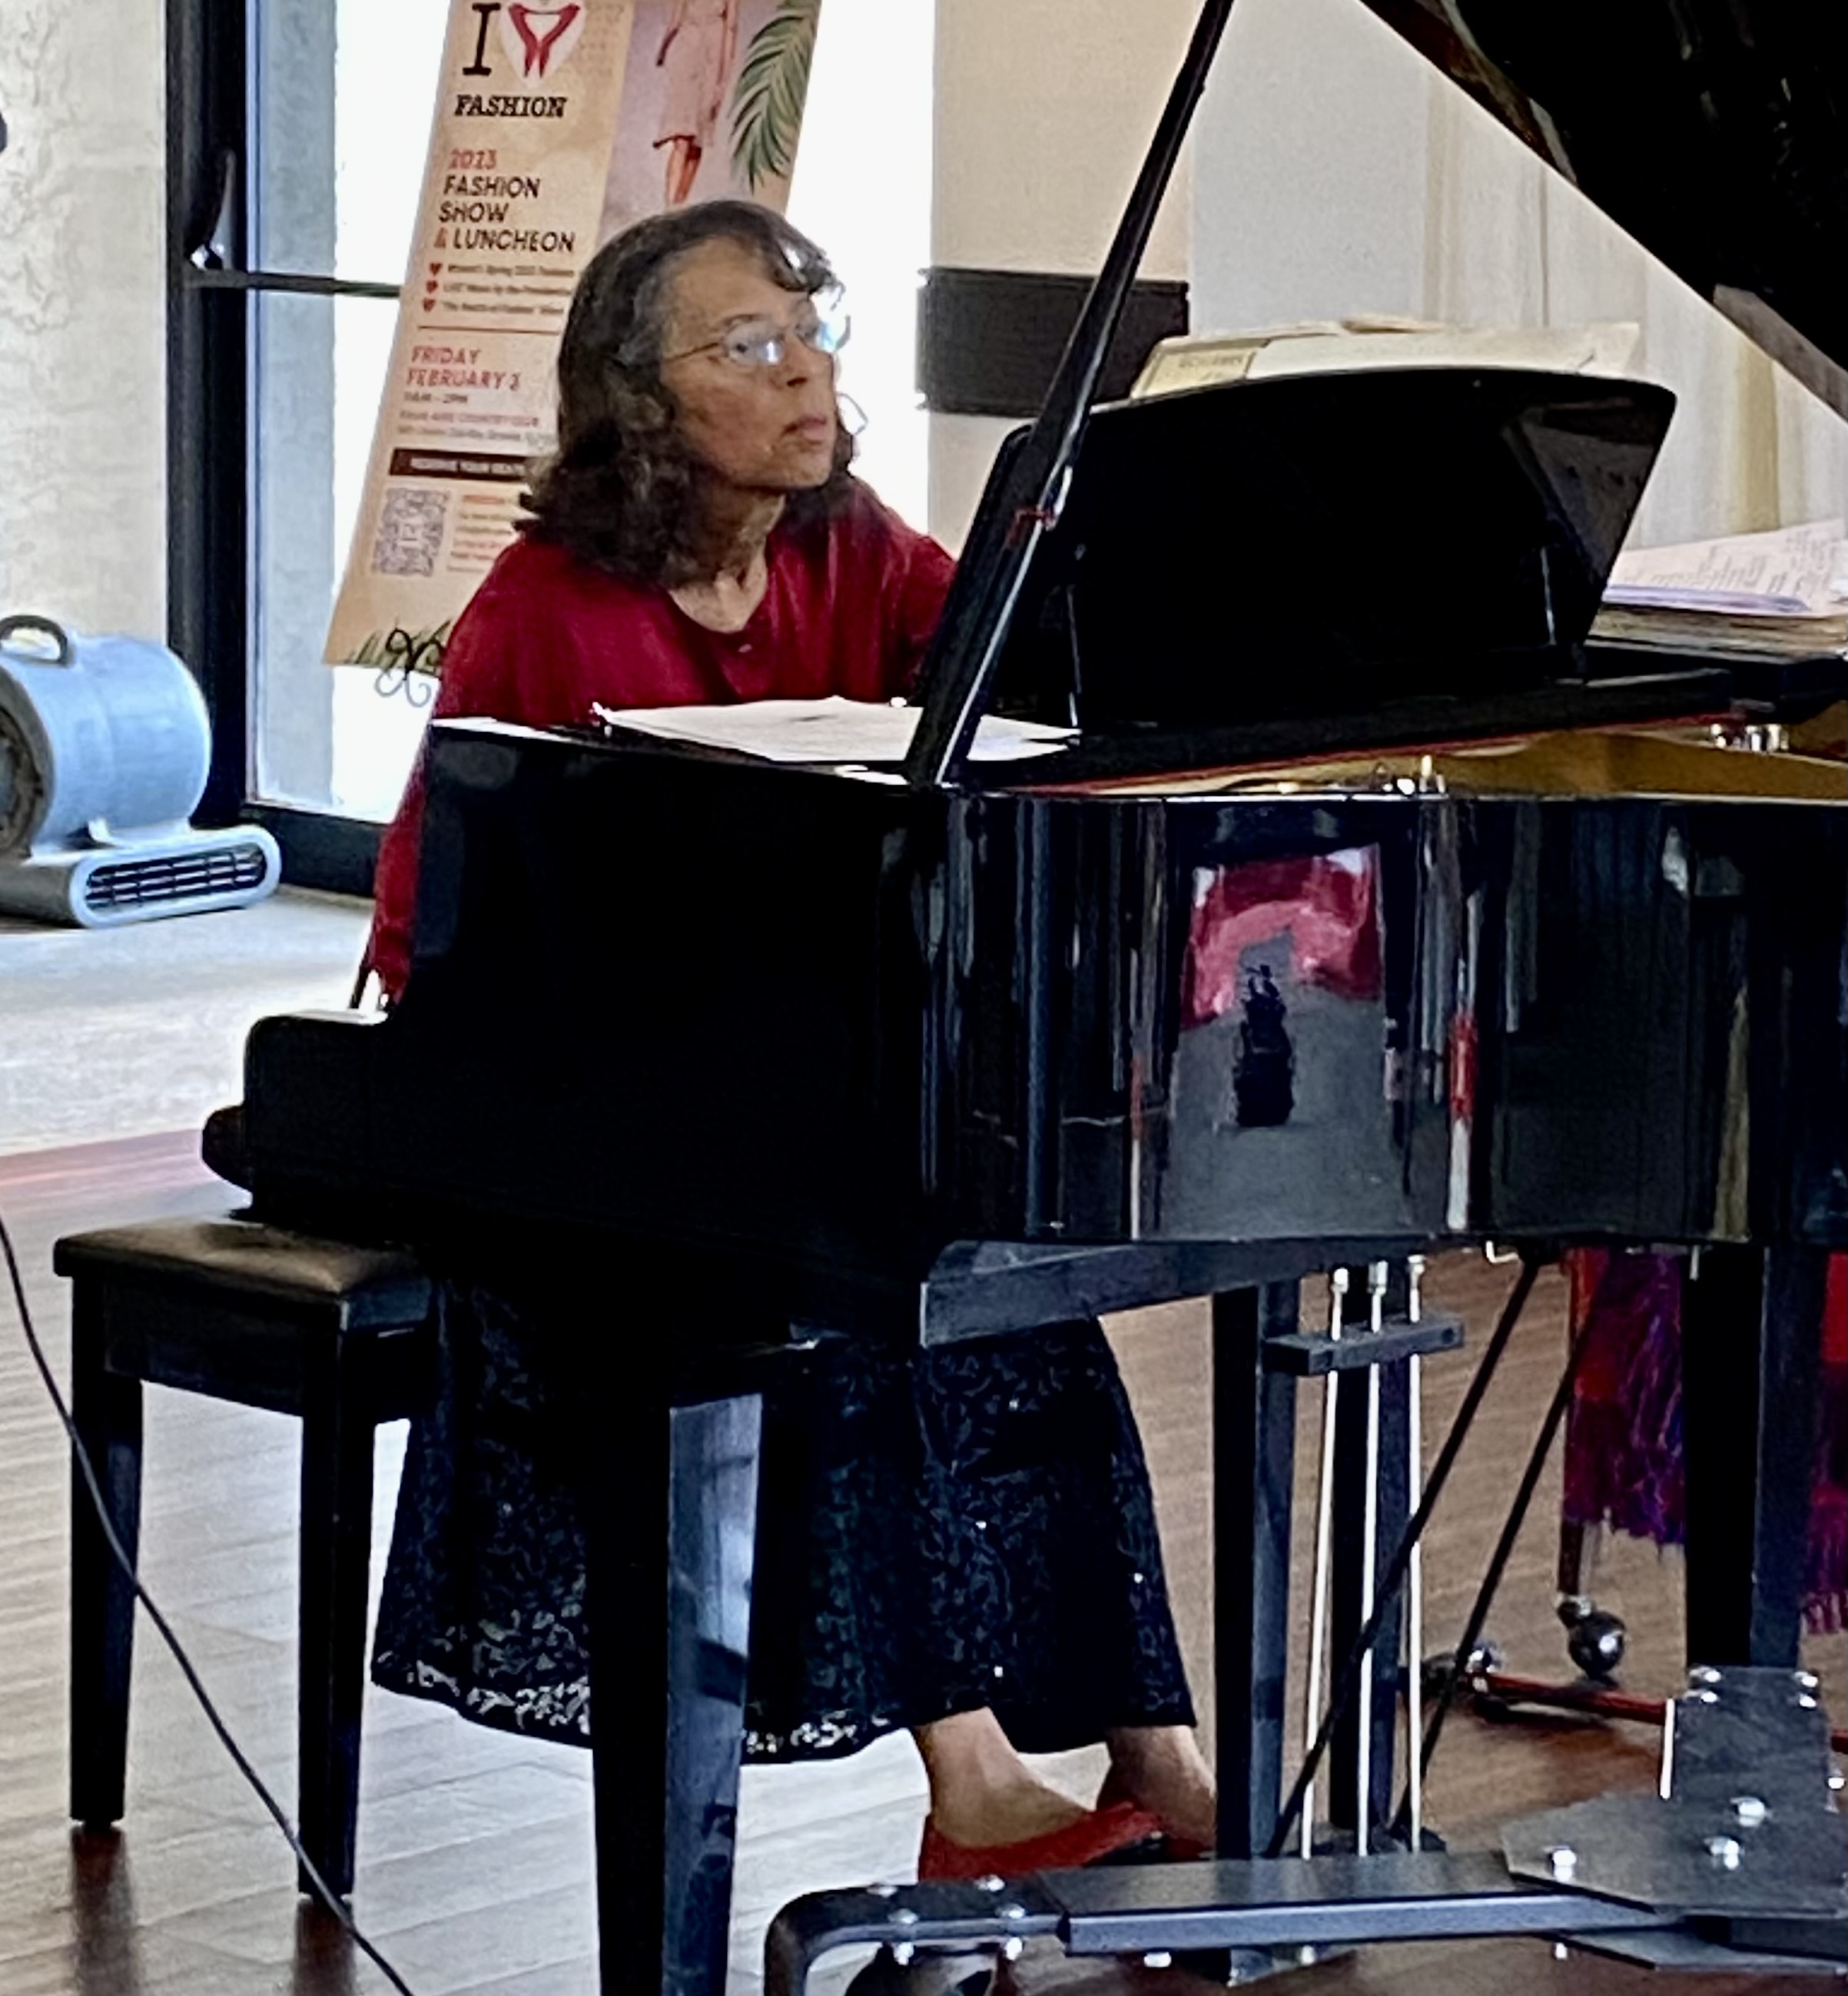 AWARD-WINNING DR. MARSHA KINDALL-SMITH PERFORMED AT THE DECEMBER 16TH HOLIDAY LUNCHEON.